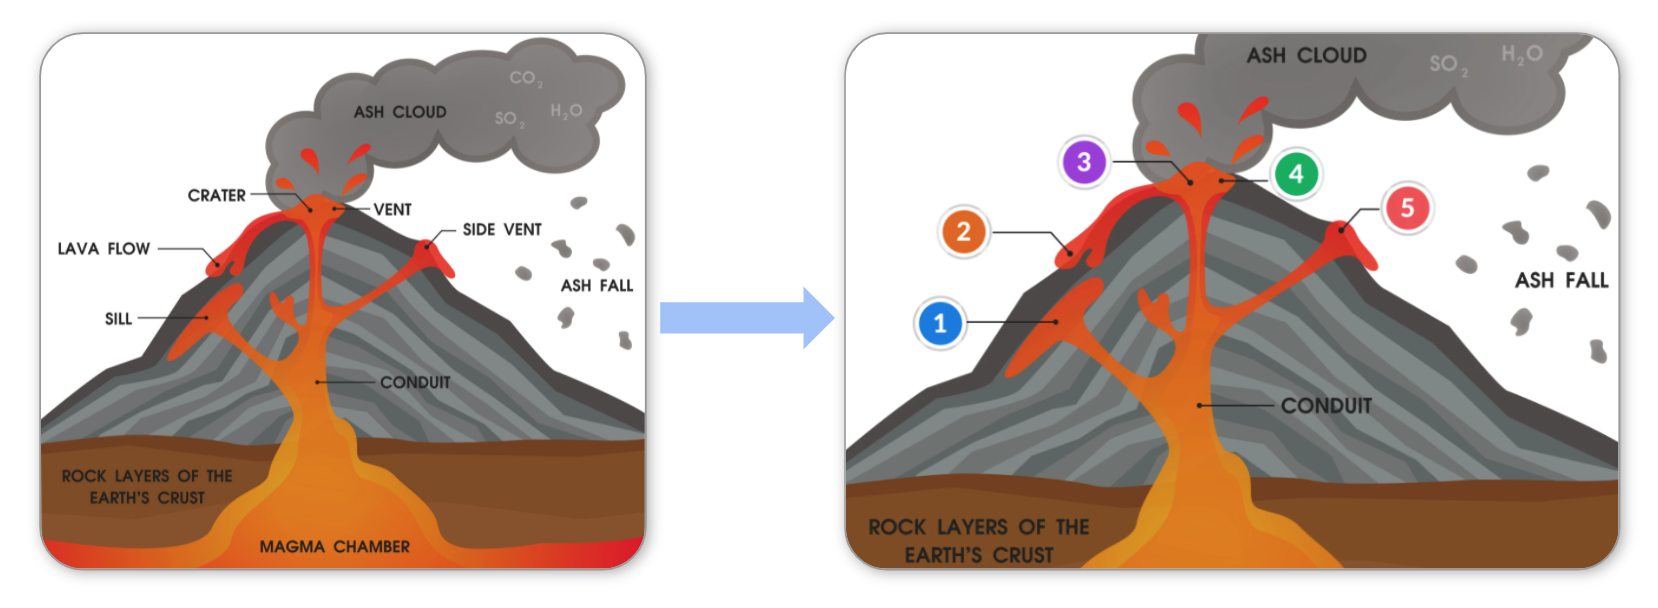 Volcano_image_labels.png